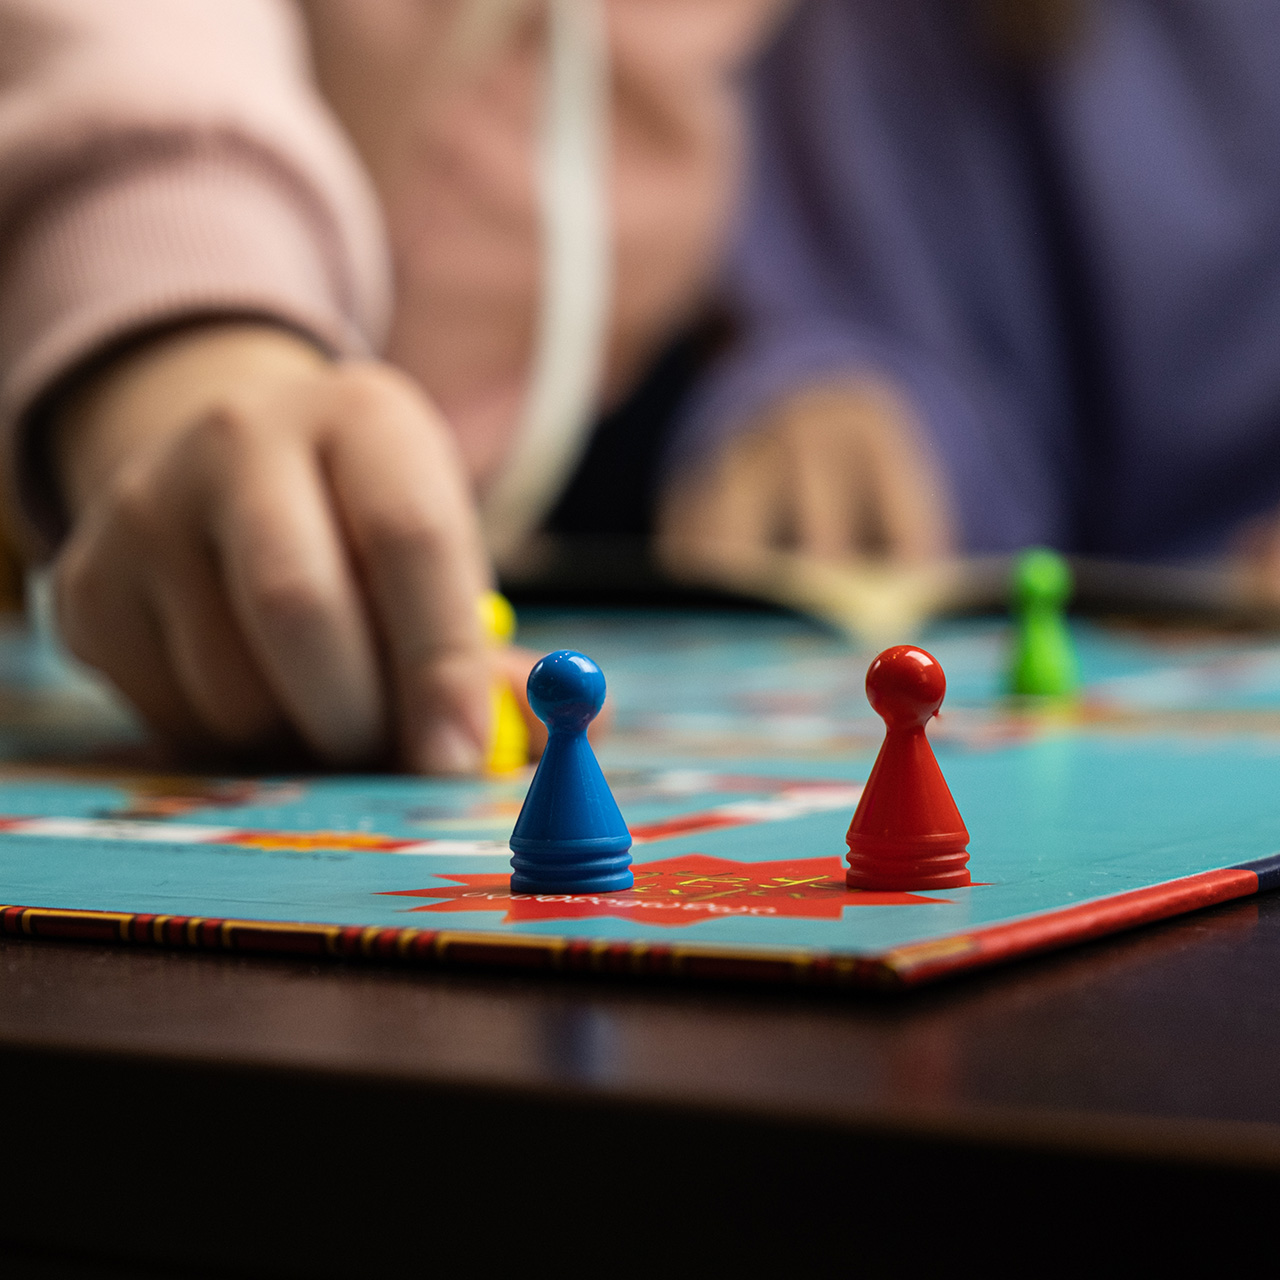 Join the fun with board games